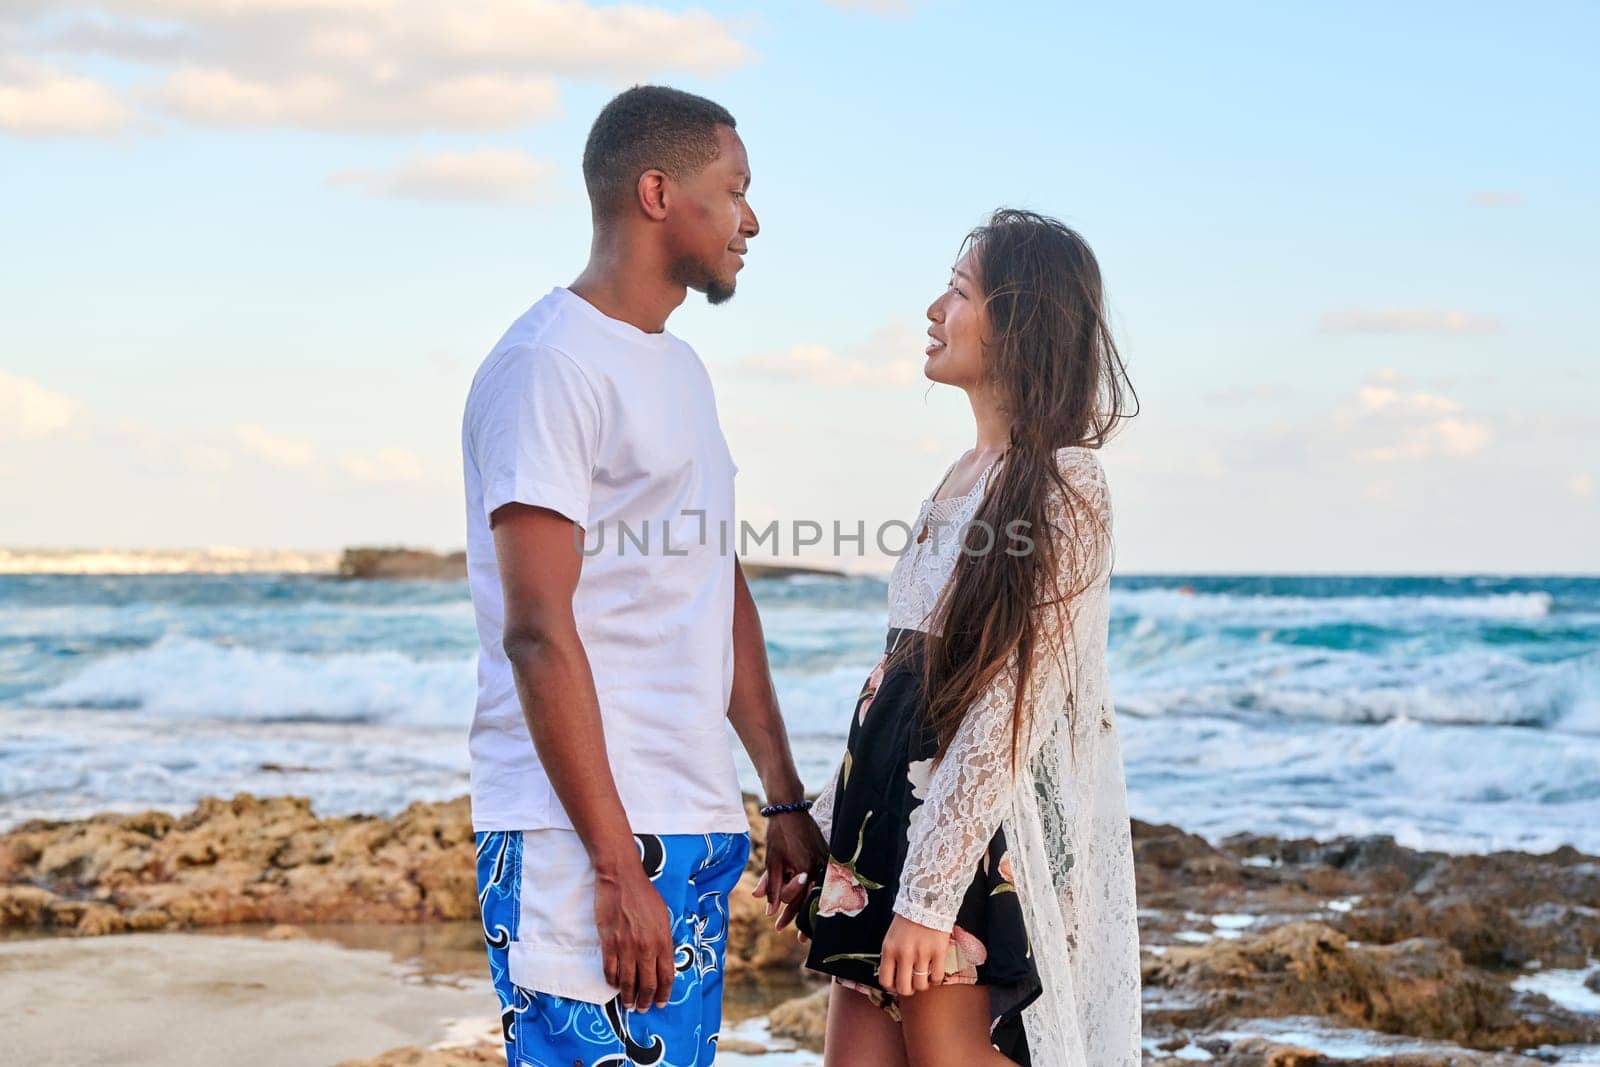 Beautiful young couple in love on beach. Portrait of Asian woman and African American man looking at each other. Multicultural, multiethnic family, relationships, togetherness, lifestyle, sea nature vacation